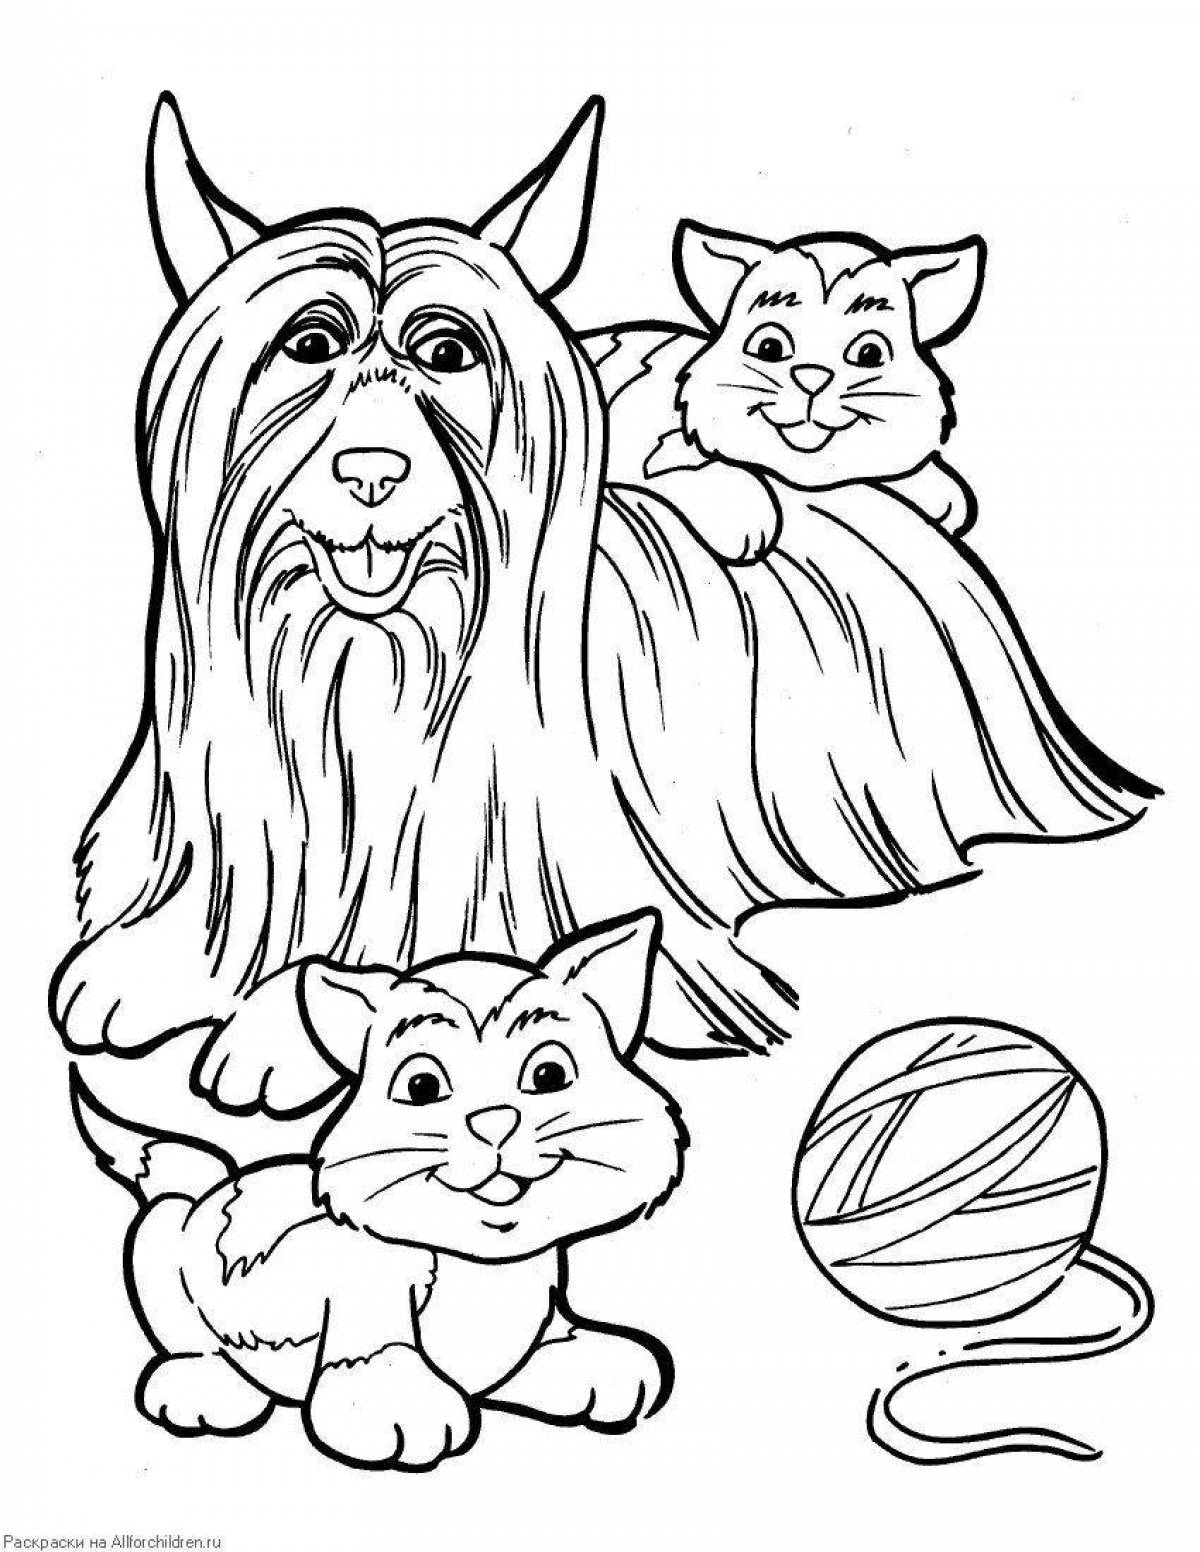 Funny cat and dog coloring book